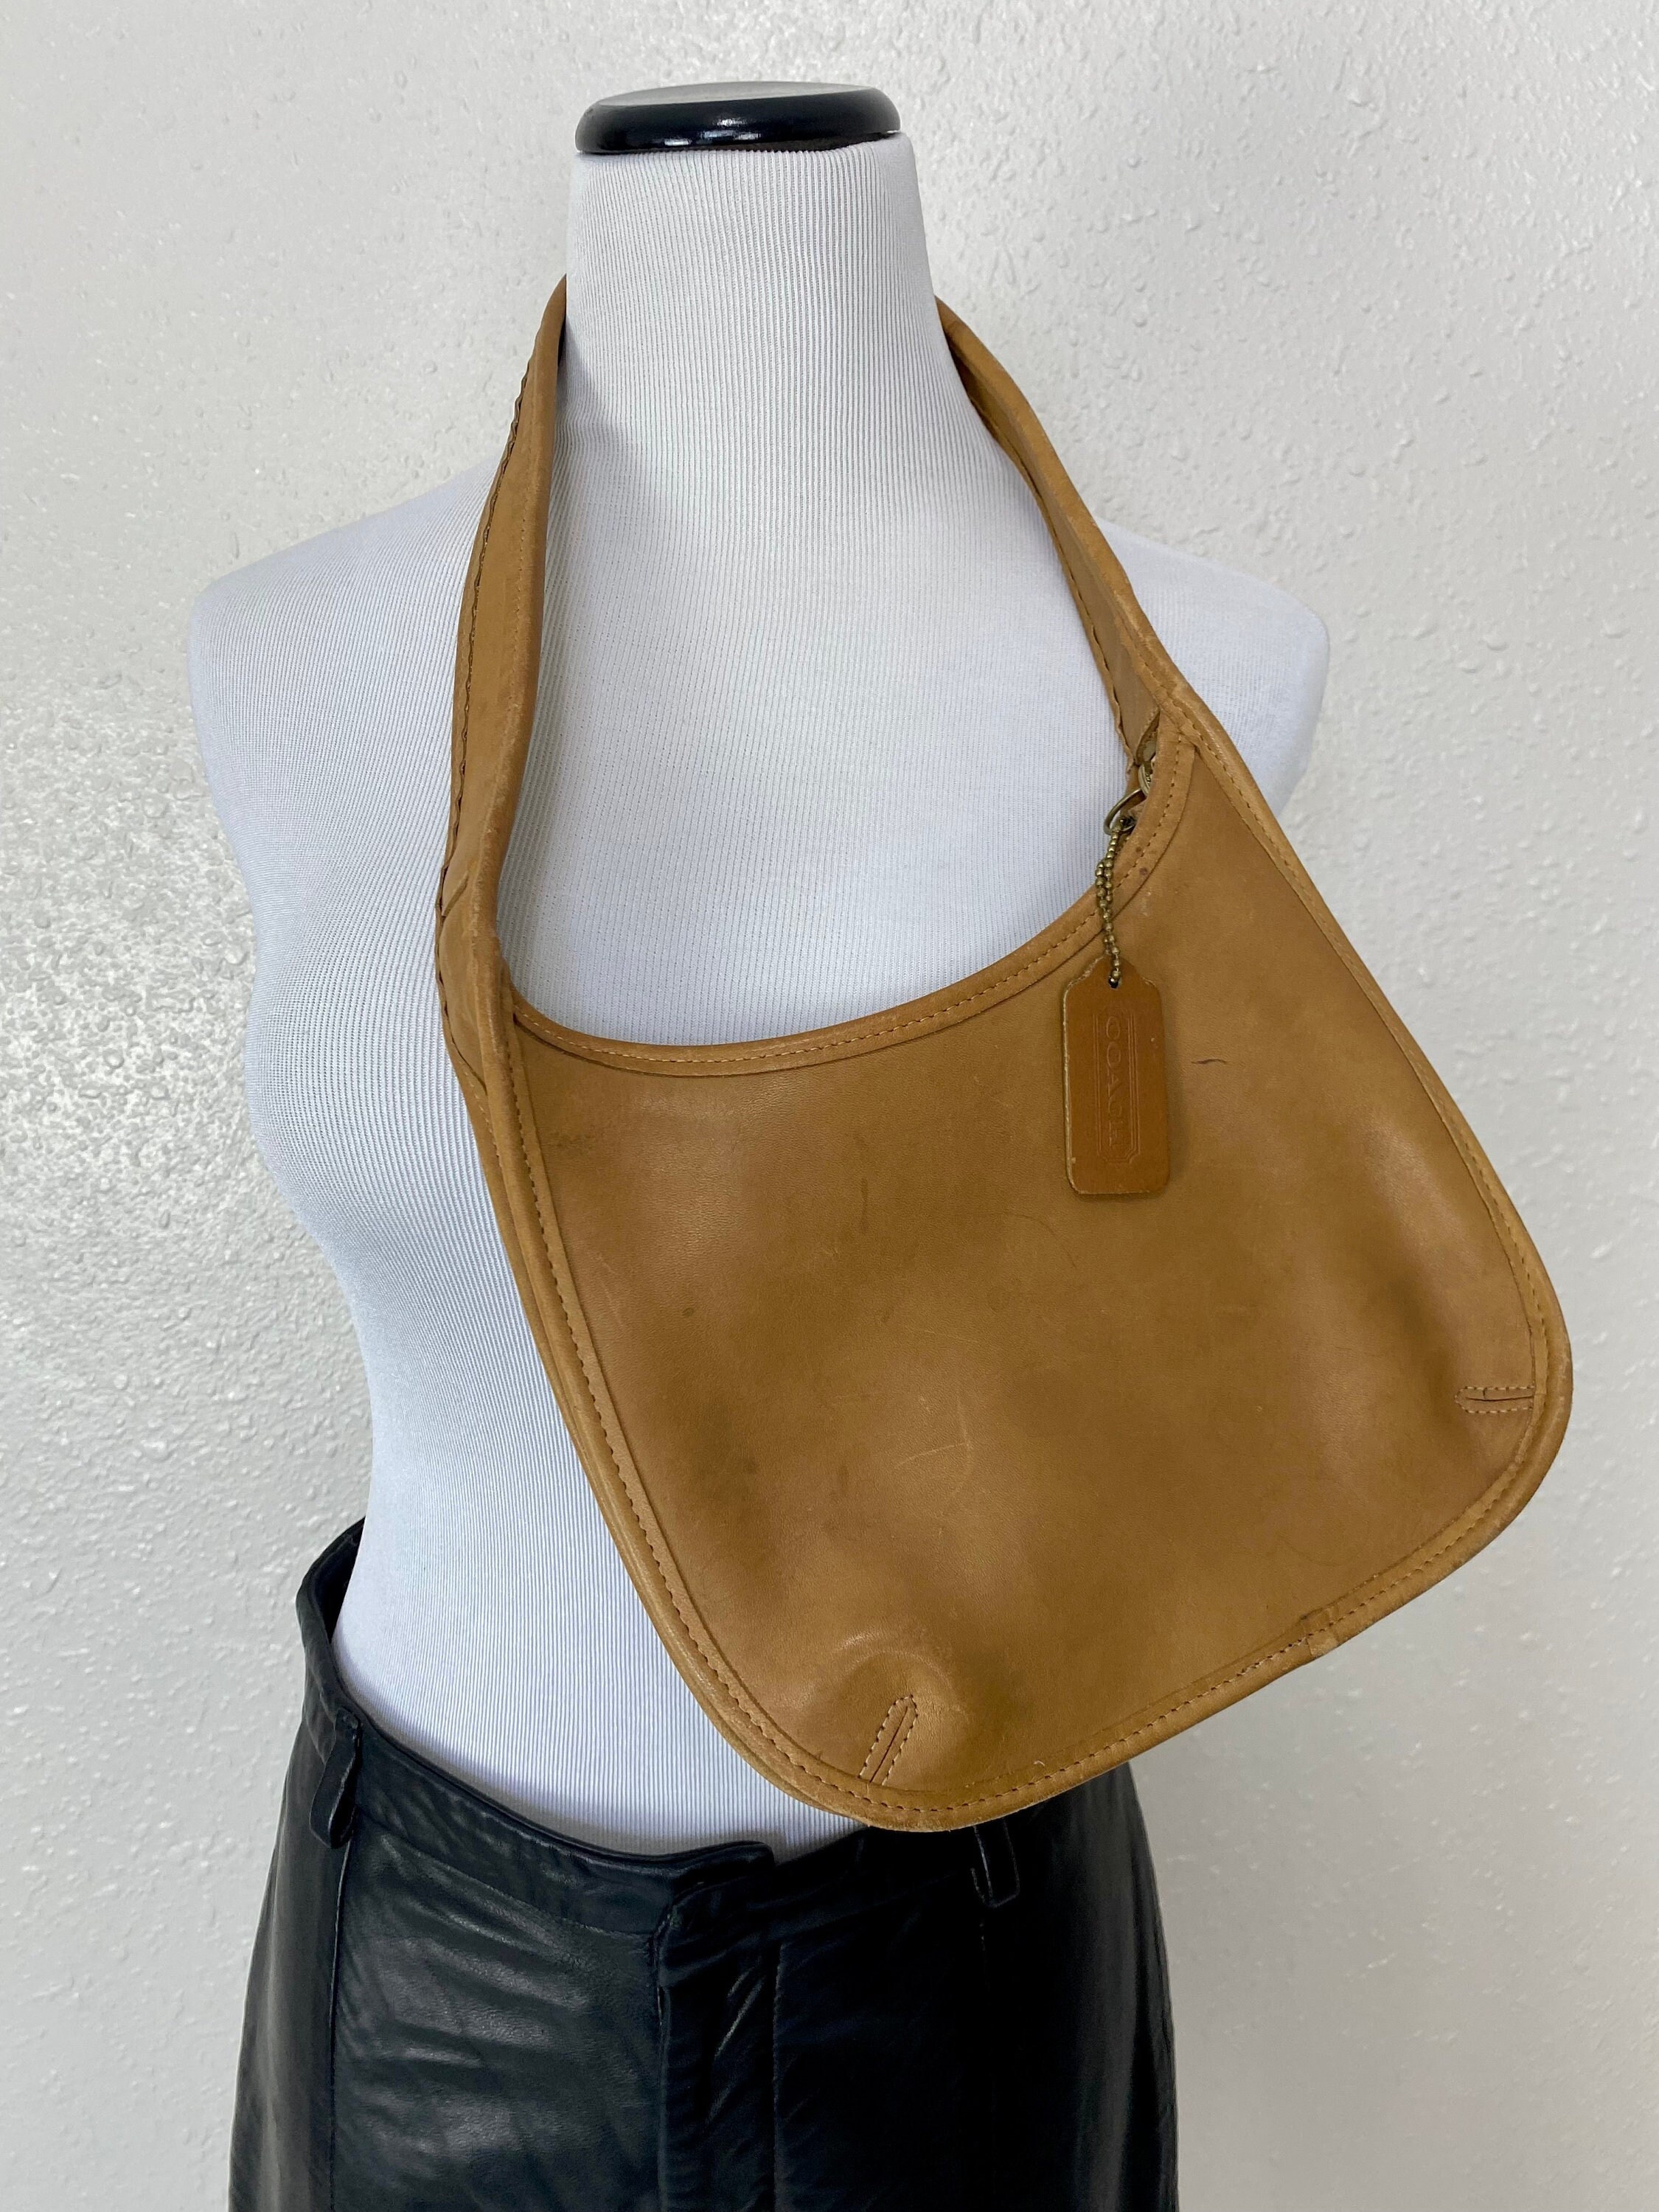 Hopping on the Coach train with this vintage Ergo ✨ : r/handbags